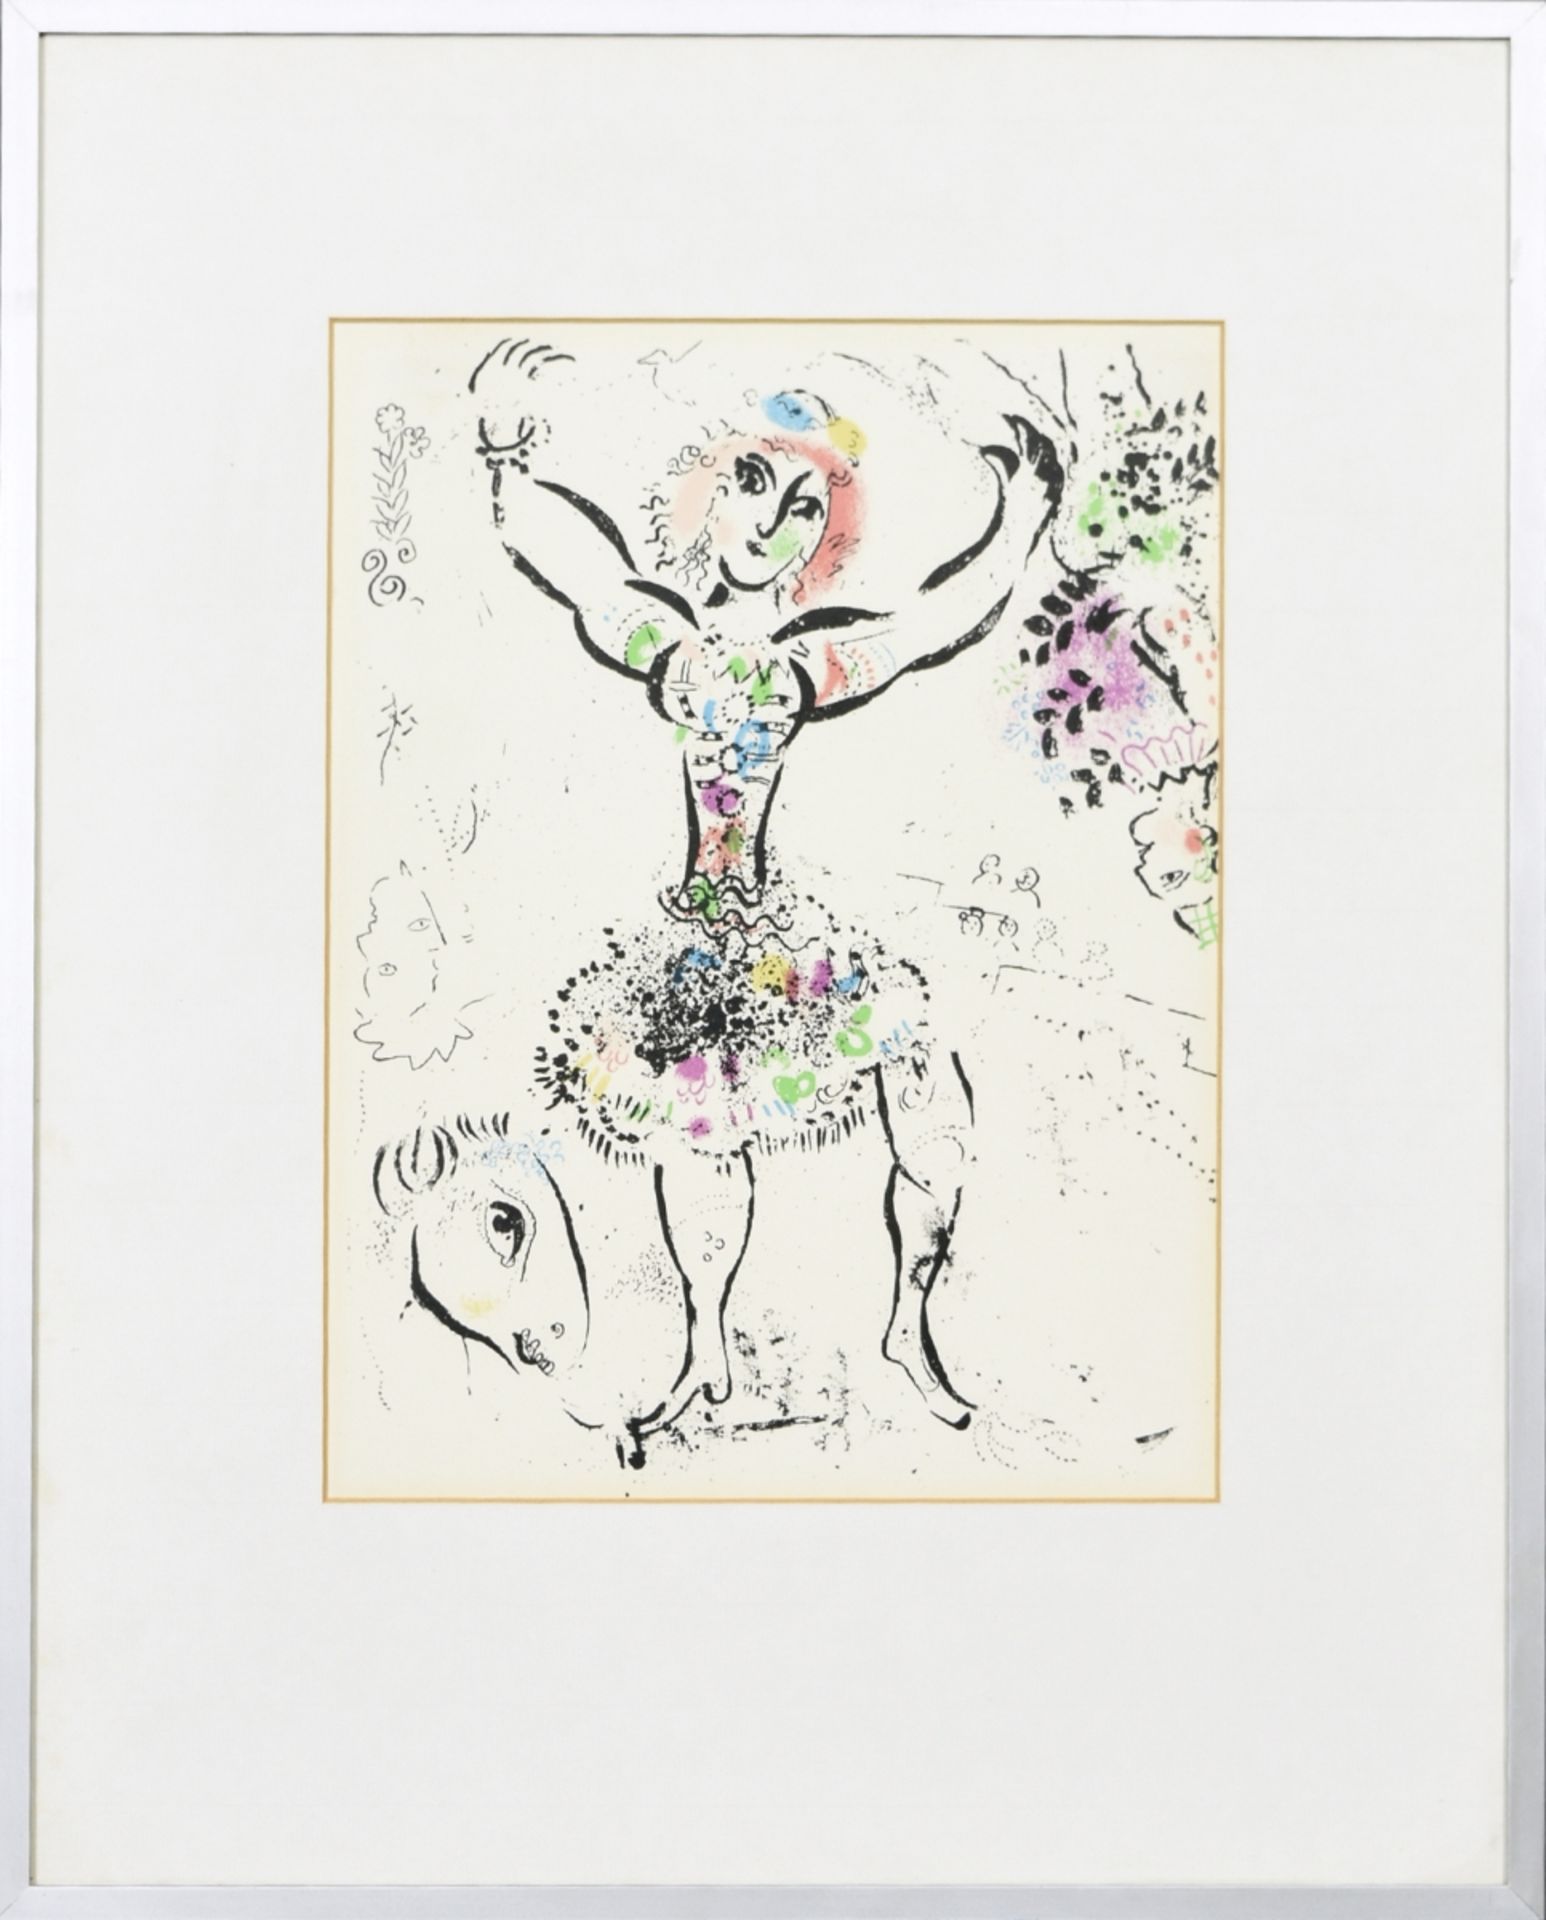 Chagall, Marc (1887 Witebsk - 1985 Vence) - Image 2 of 2